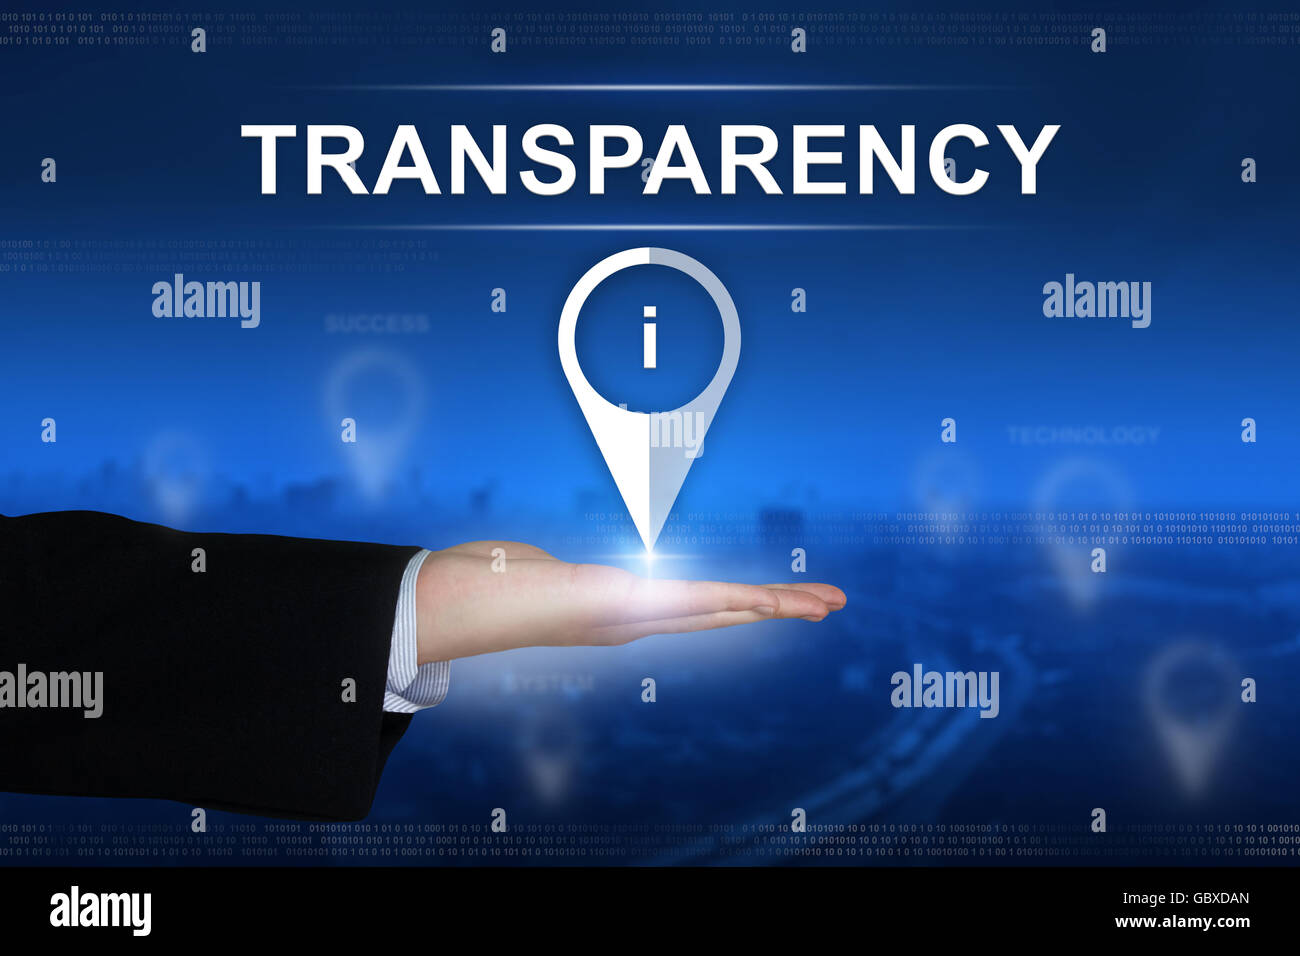 transparency button with business hand on blurred background Stock Photo